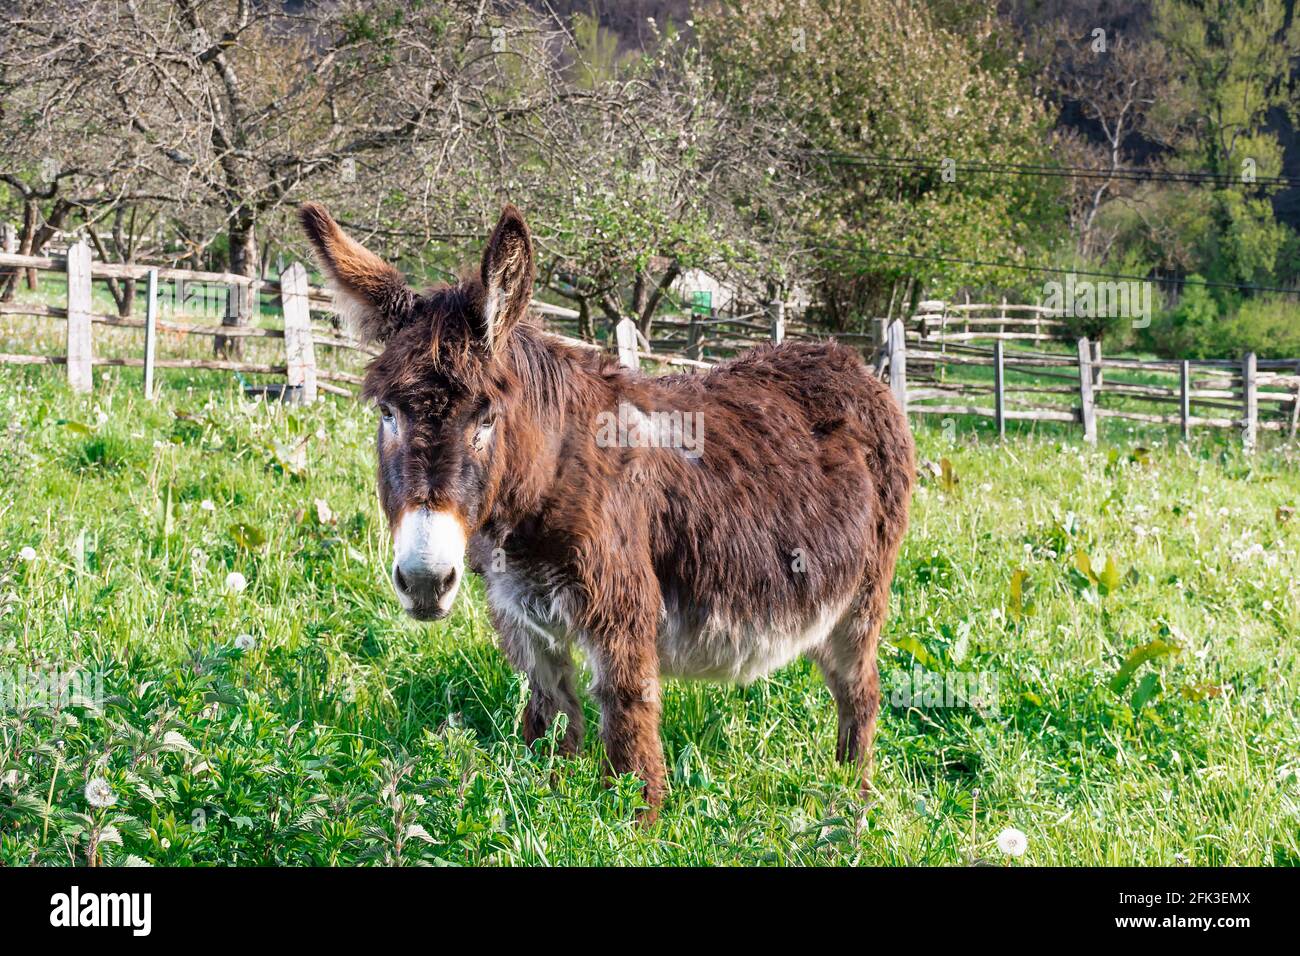 Brown donkey on a farm in a village in Asturias.The photograph was taken on a sunny day and has a horizontal format. Stock Photo